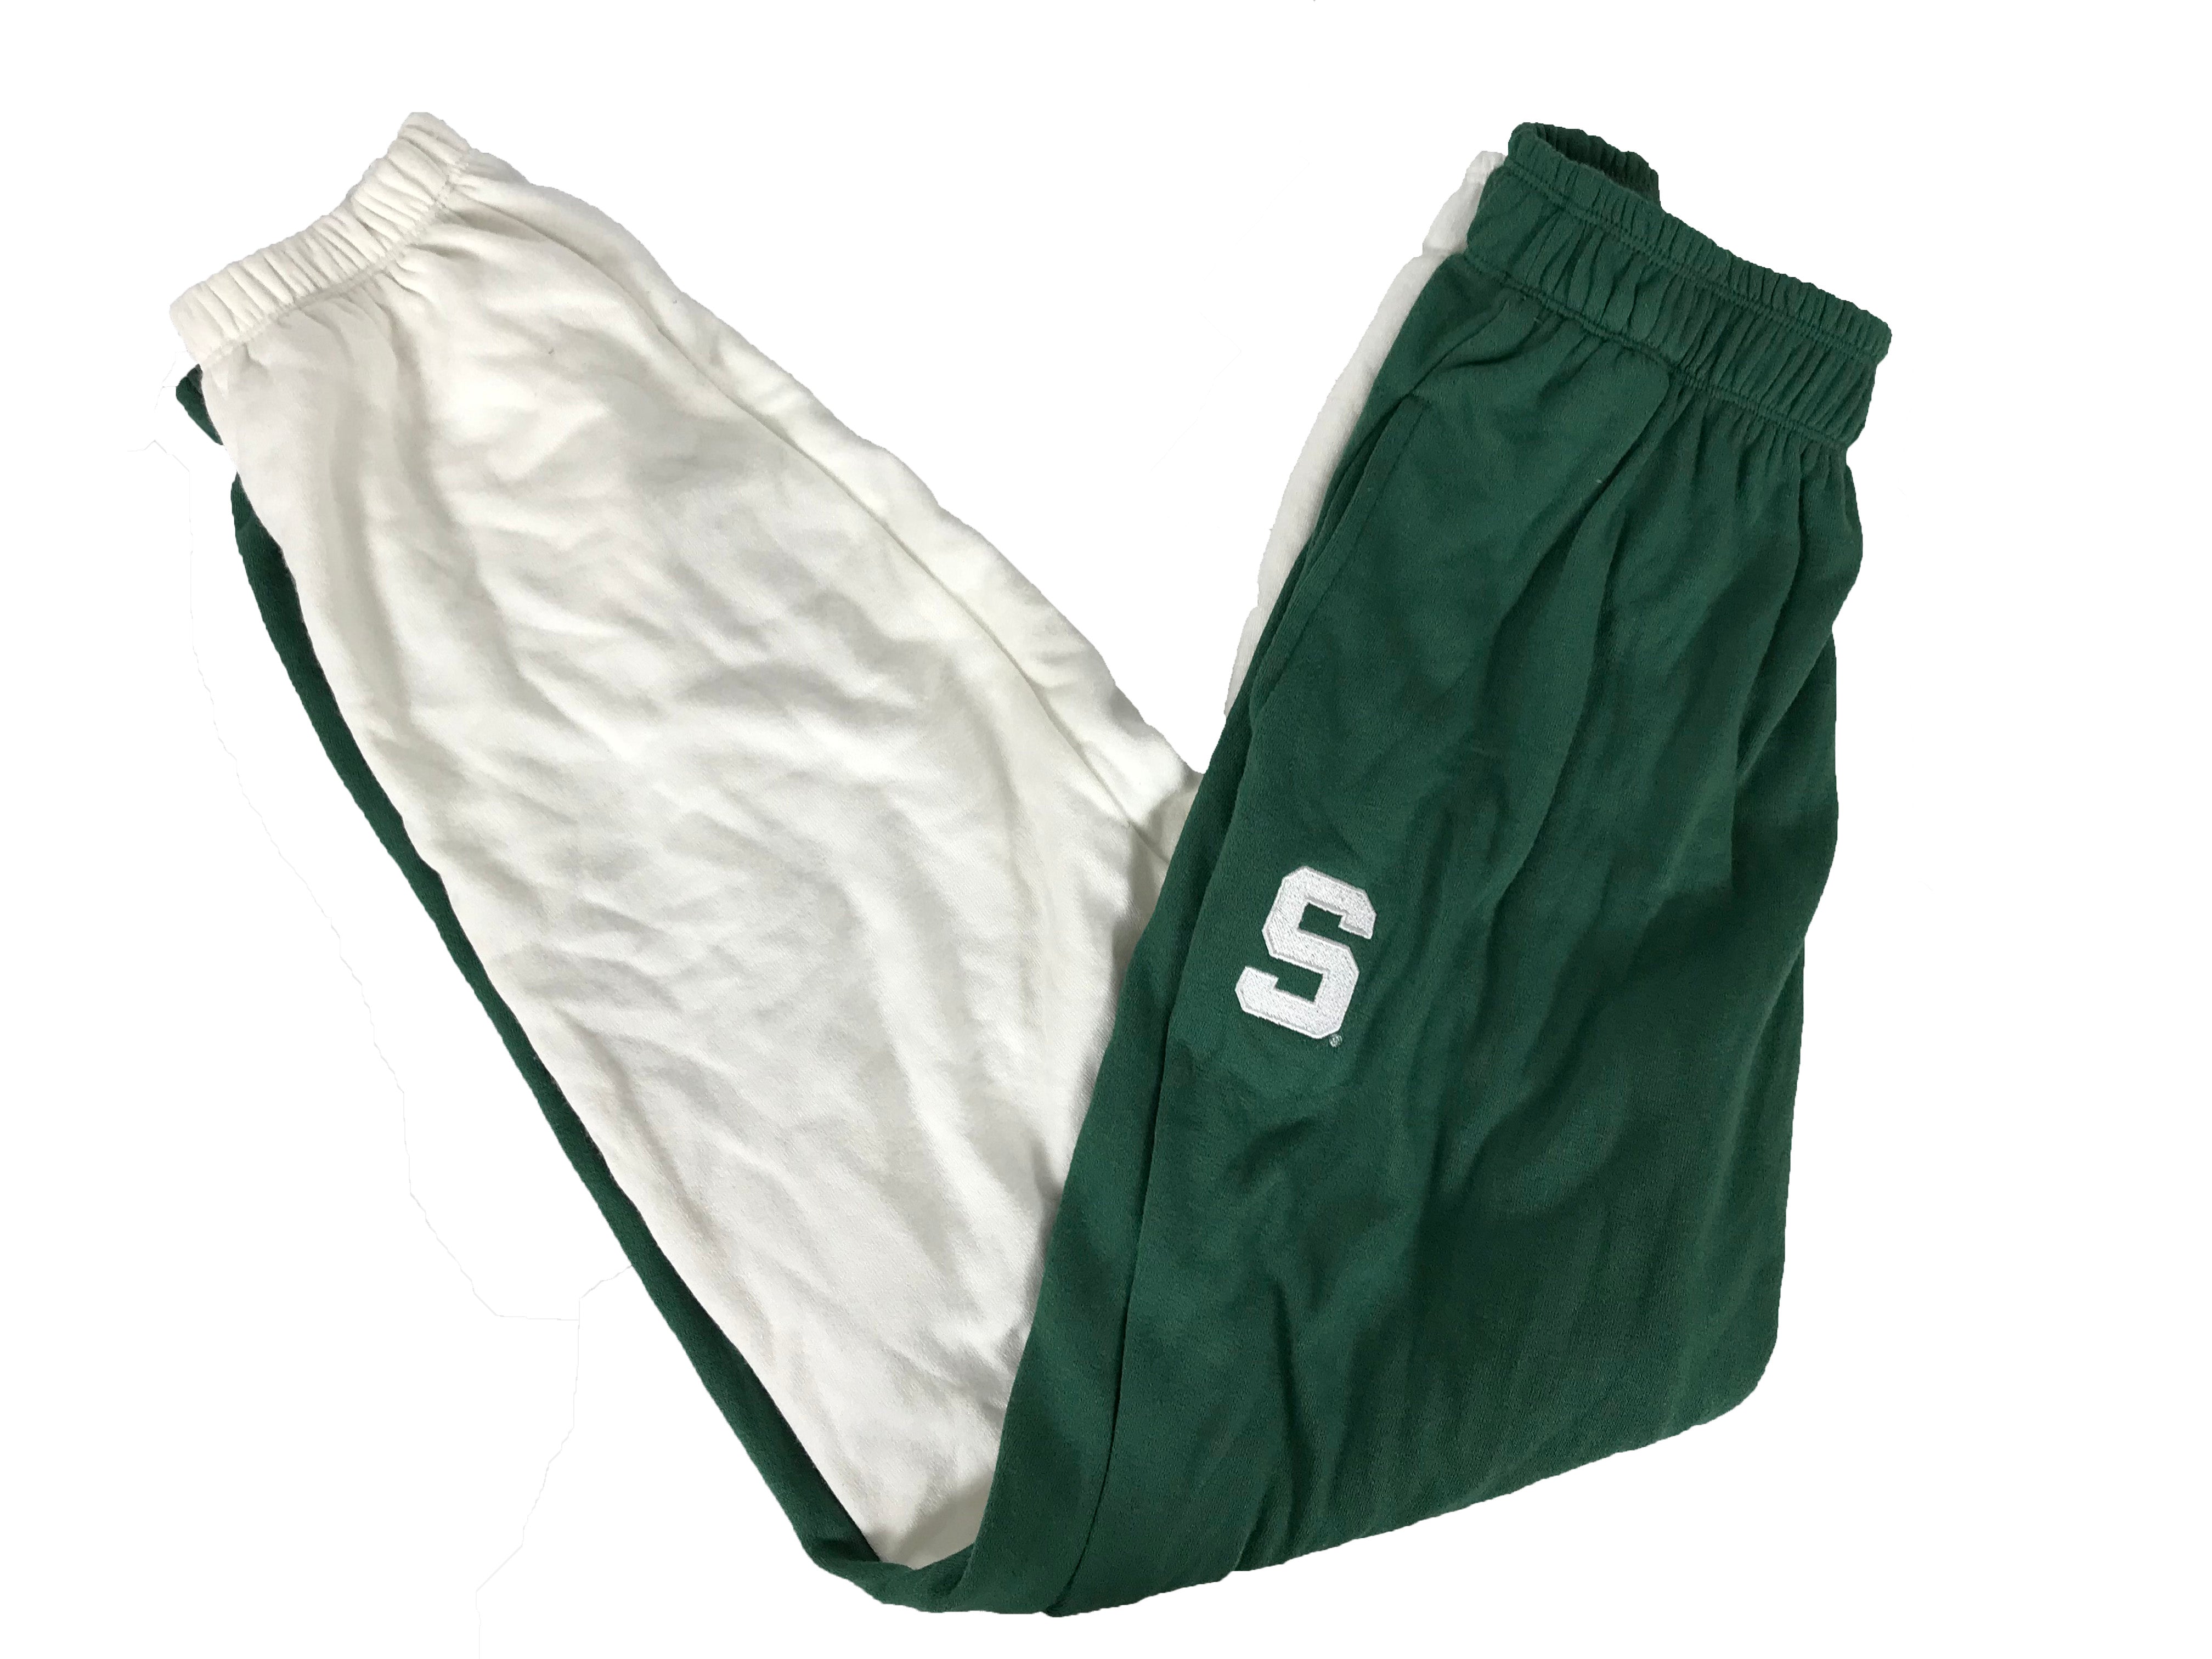 Hype and Vice Green and White Split Sweatpants Women's Size XL